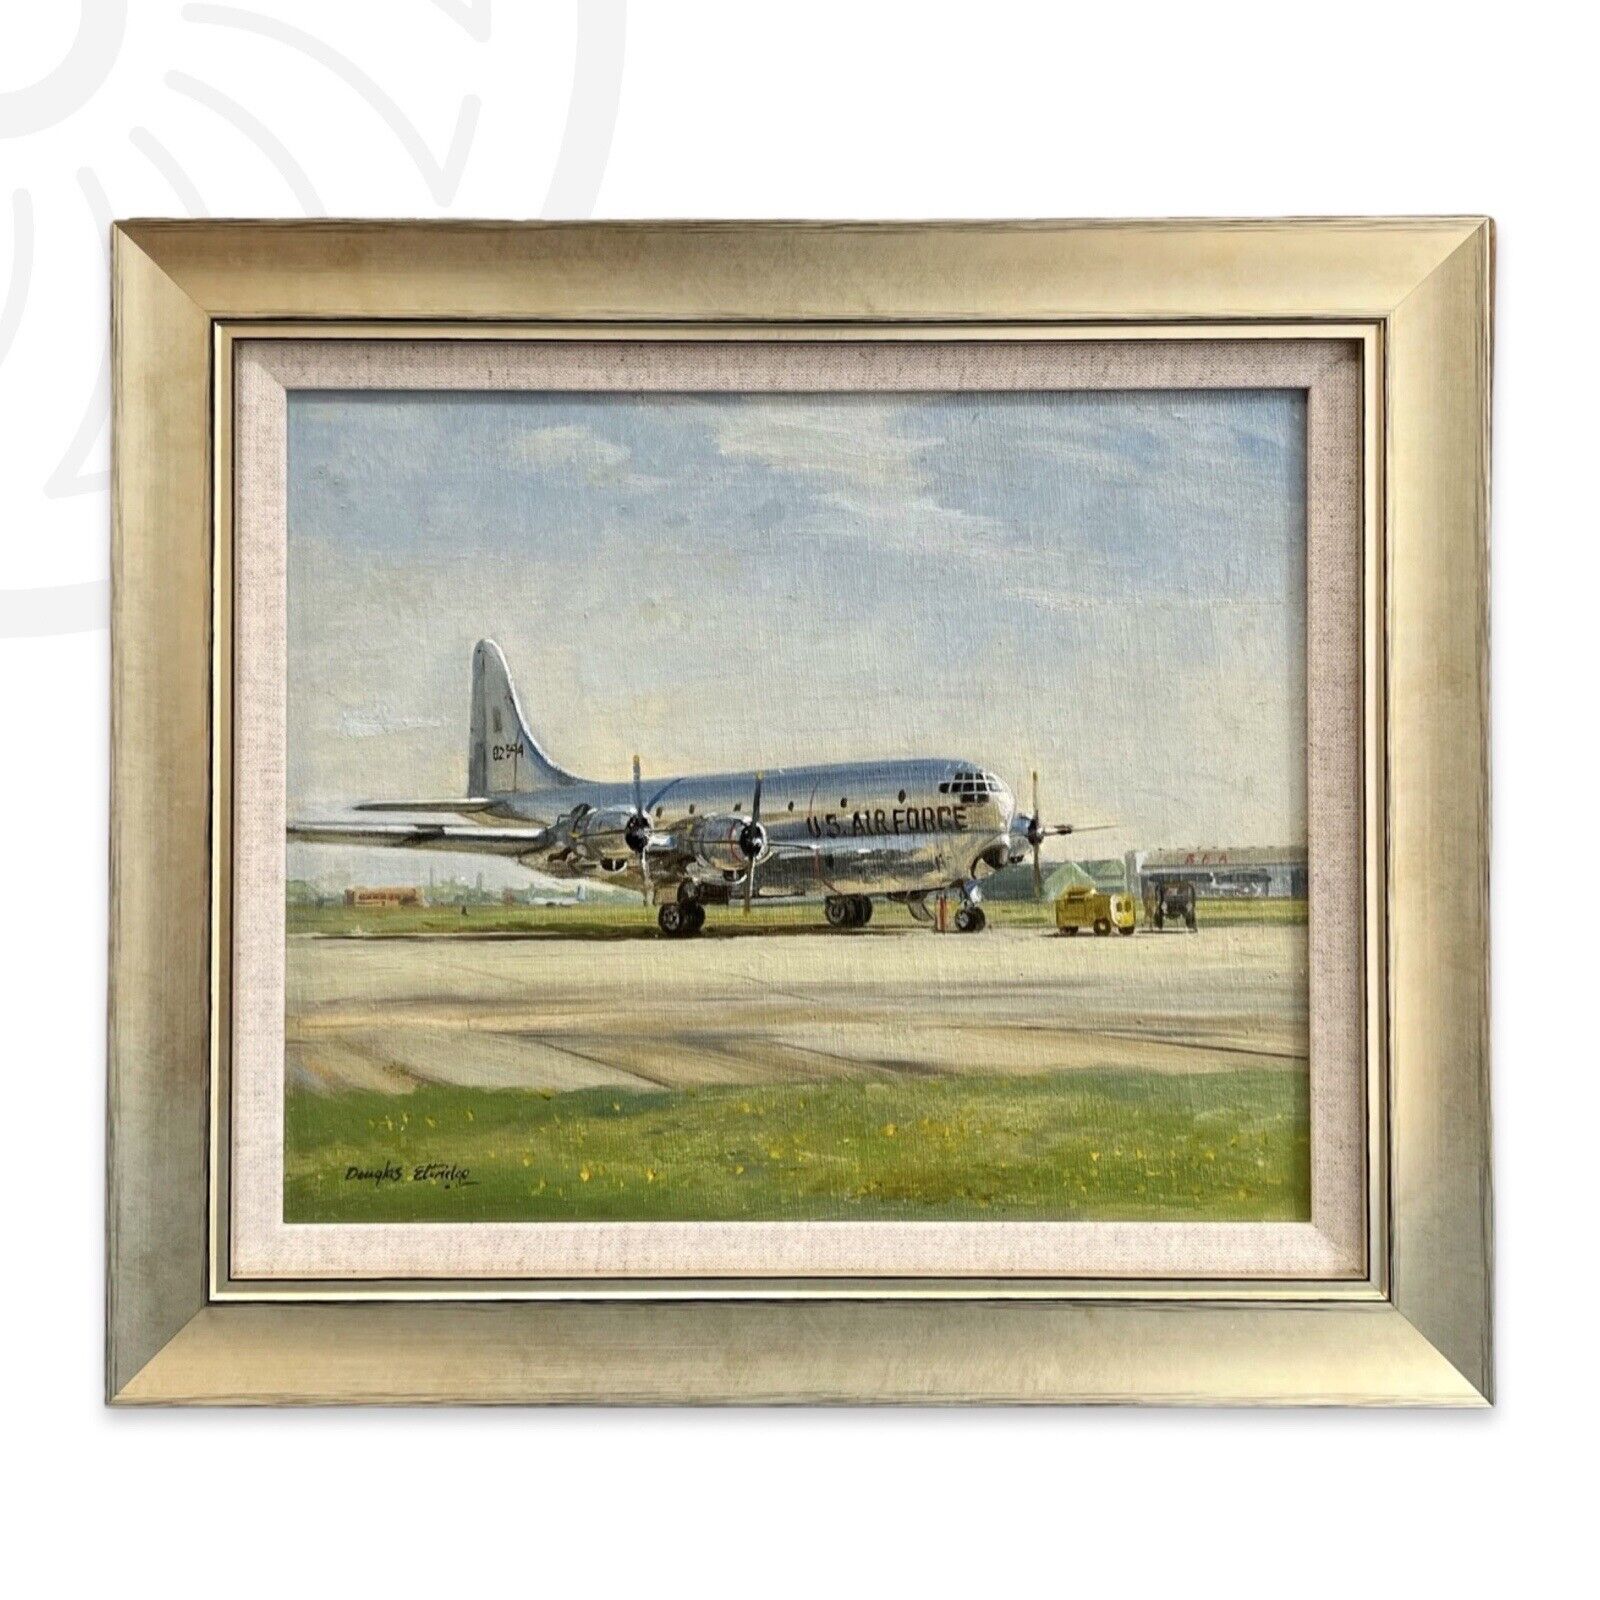 Original oil painting of Boeing Stratofreighter VC-97D VIP Transport at Heathrow